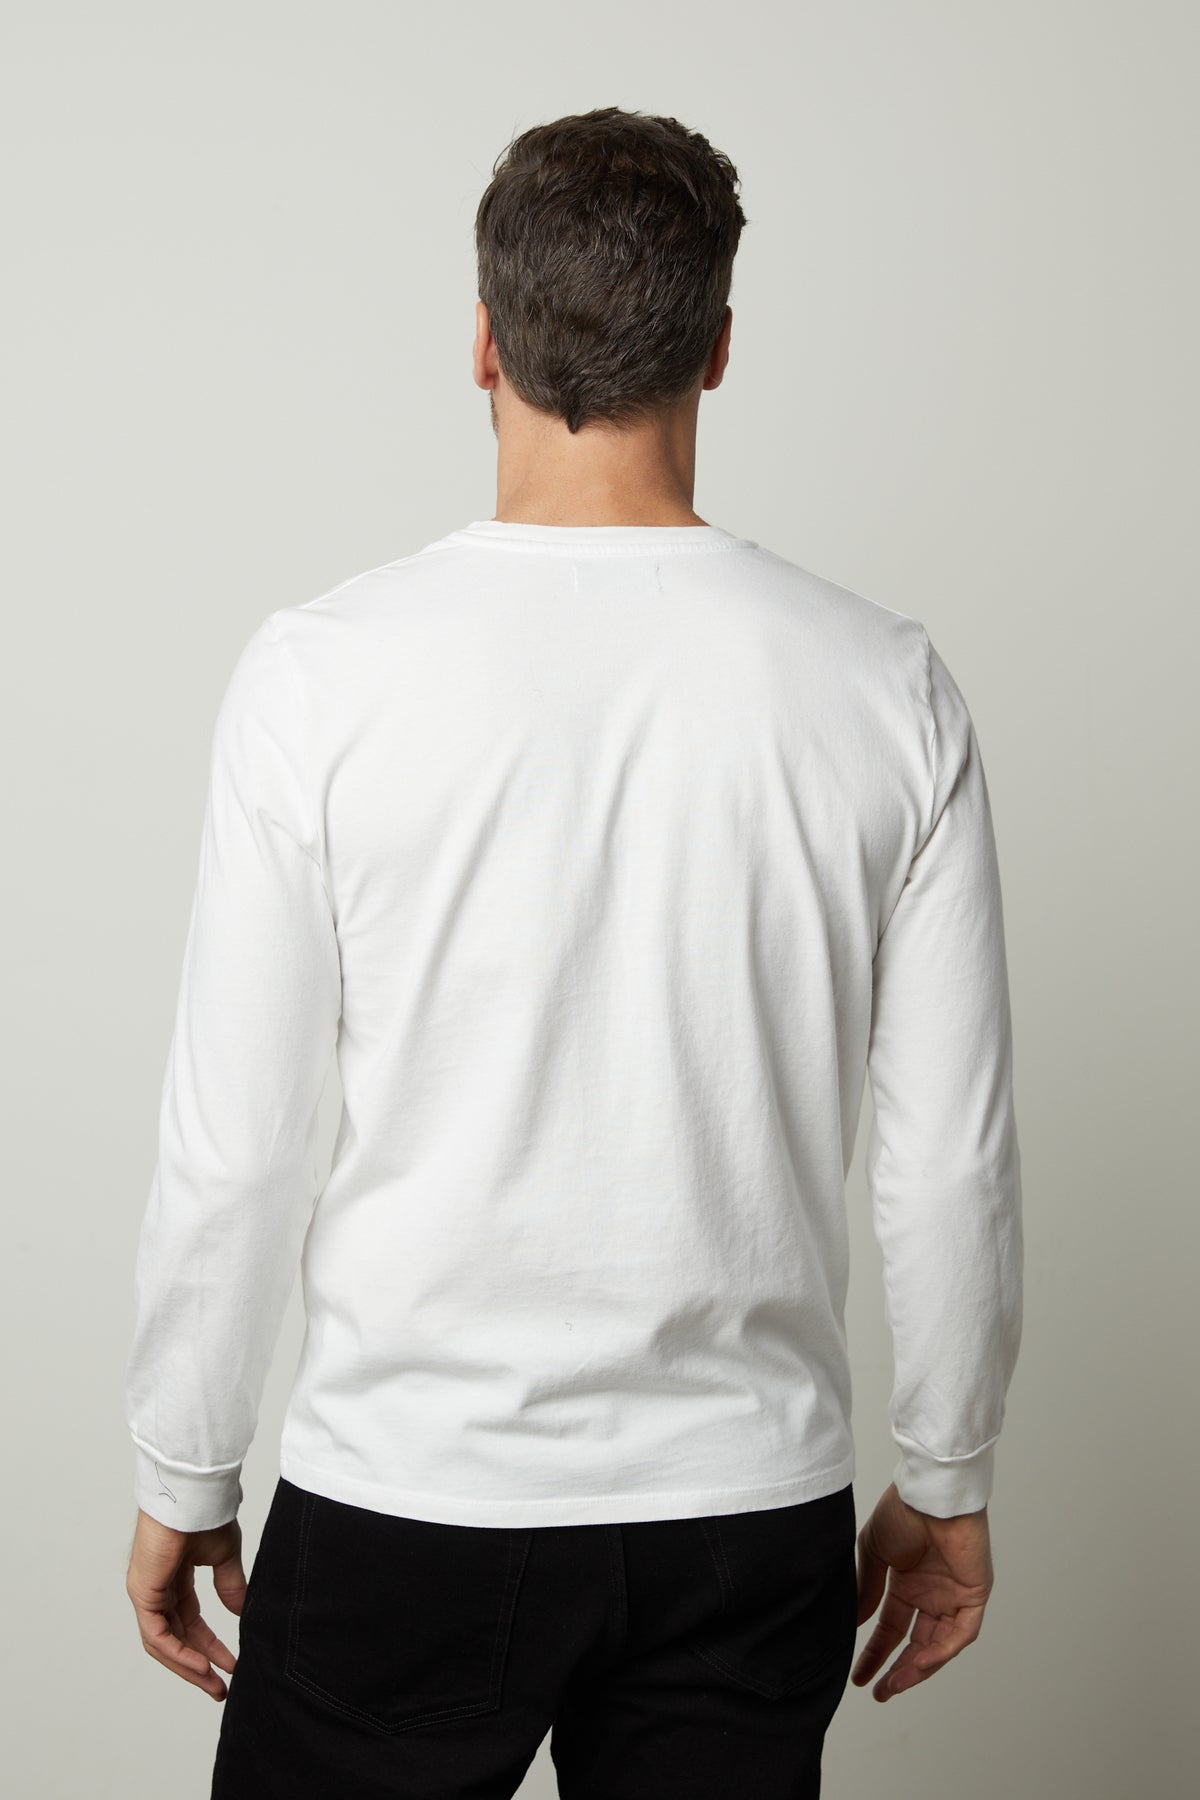   The back view of a man wearing a Velvet by Graham & Spencer REMI HENLEY t - shirt. 